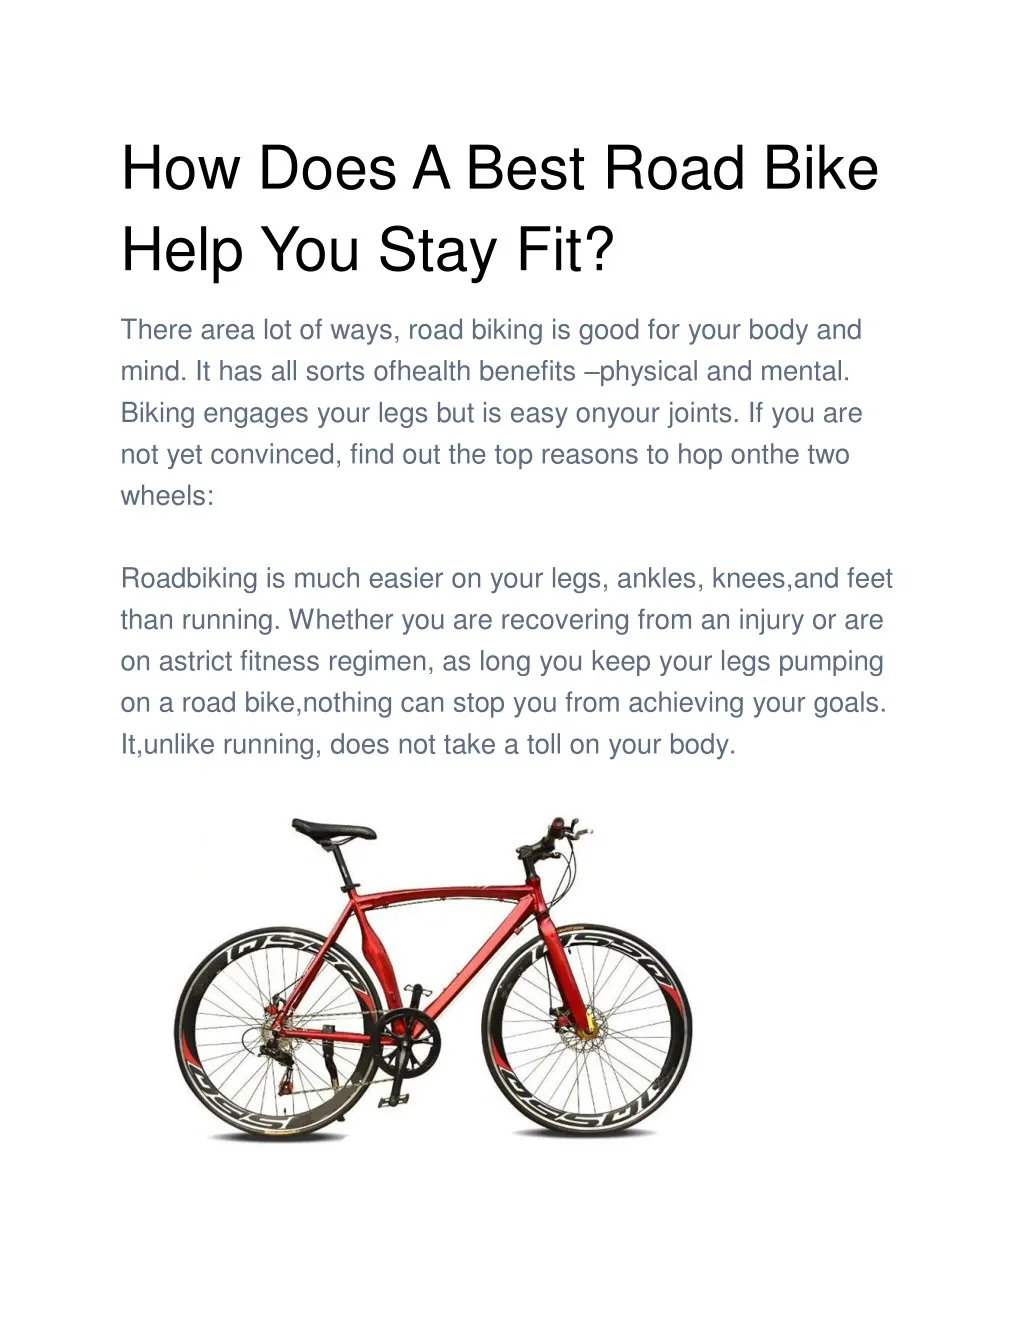 how does a best road bike help you stay fit